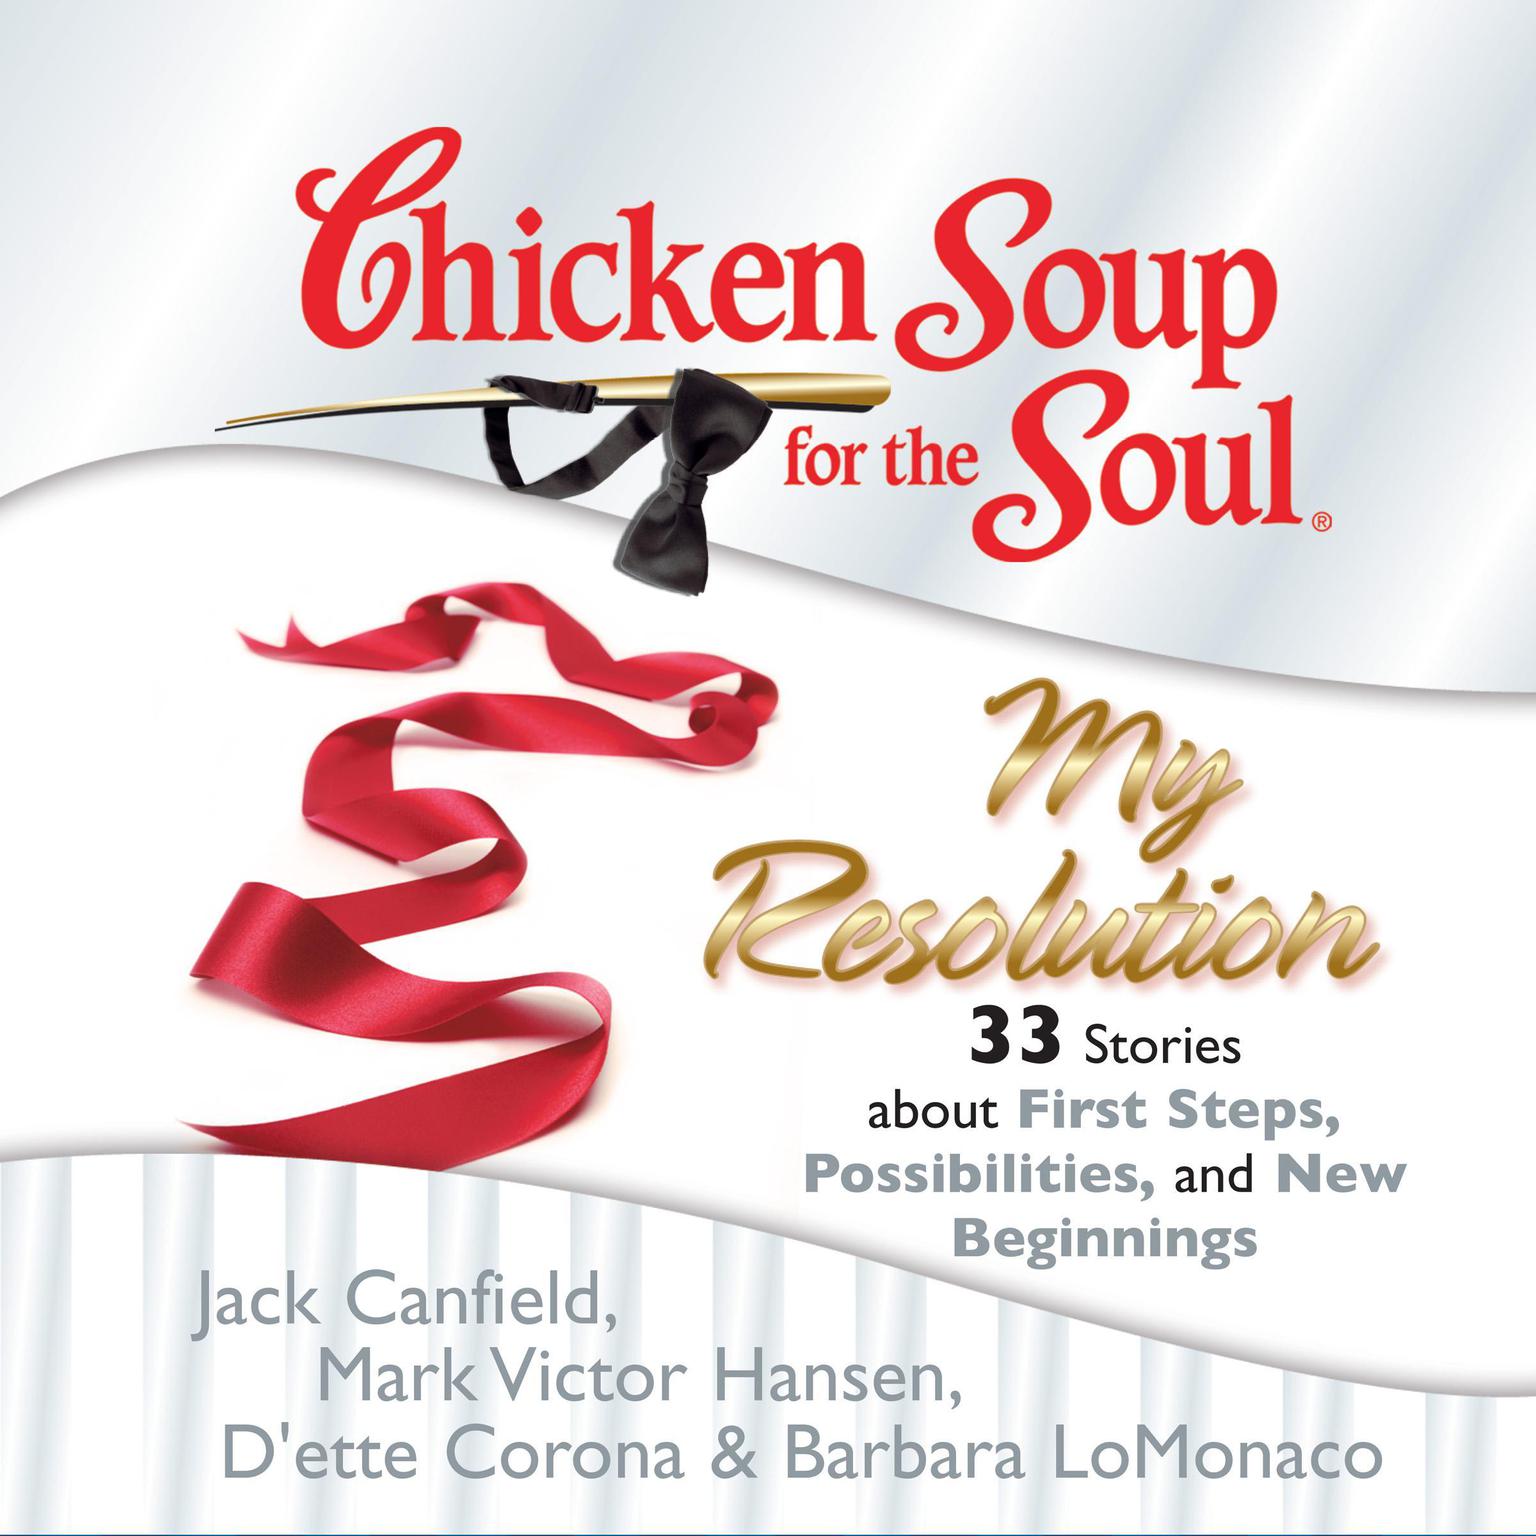 Chicken Soup for the Soul: My Resolution - 33 Stories about First Steps, Possibilities, and New Beginnings Audiobook, by Jack Canfield